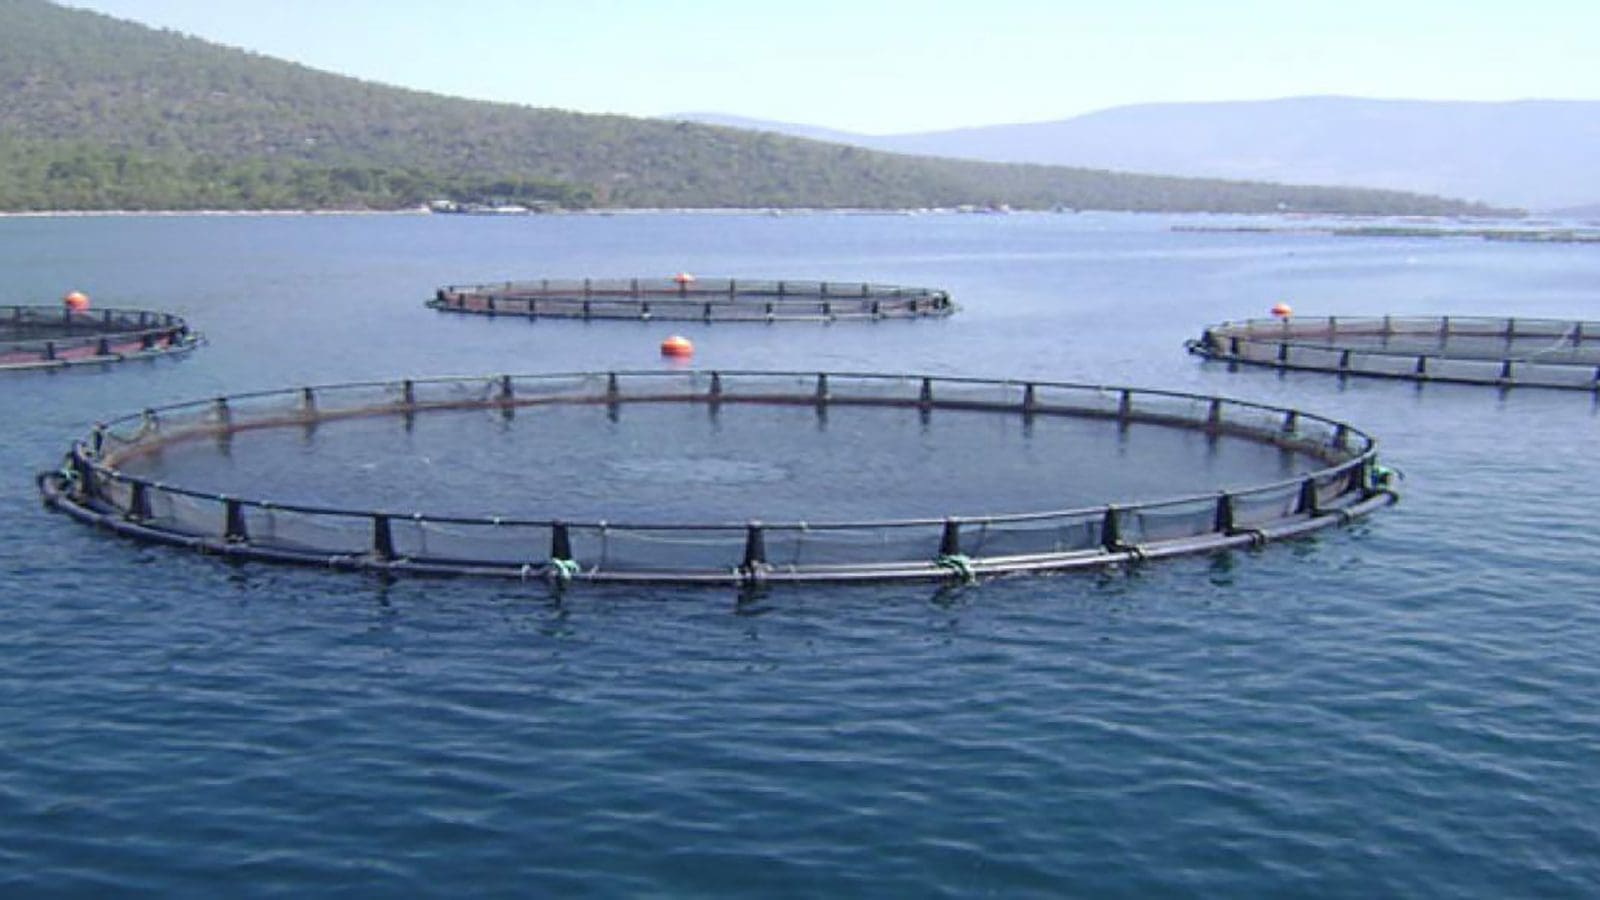 Tanzania’s government gets support in building fish sector, introduces cage fish farming